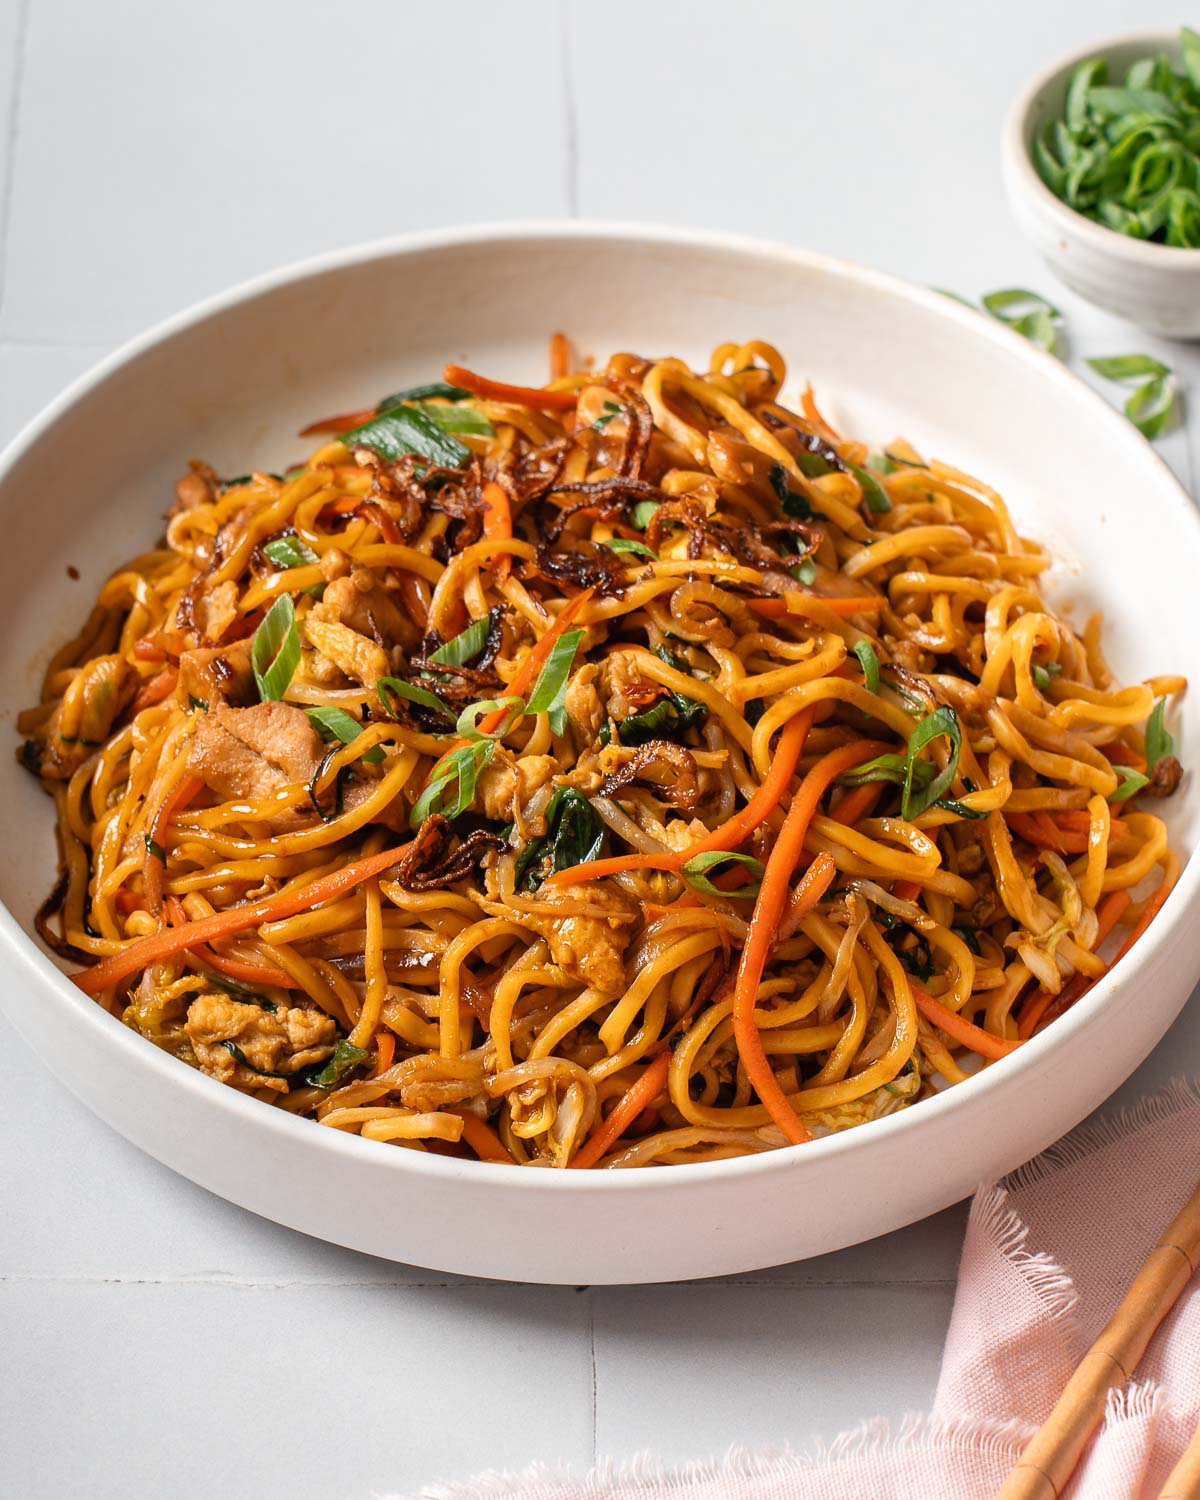 A plate of bami goreng on a tiled surface.